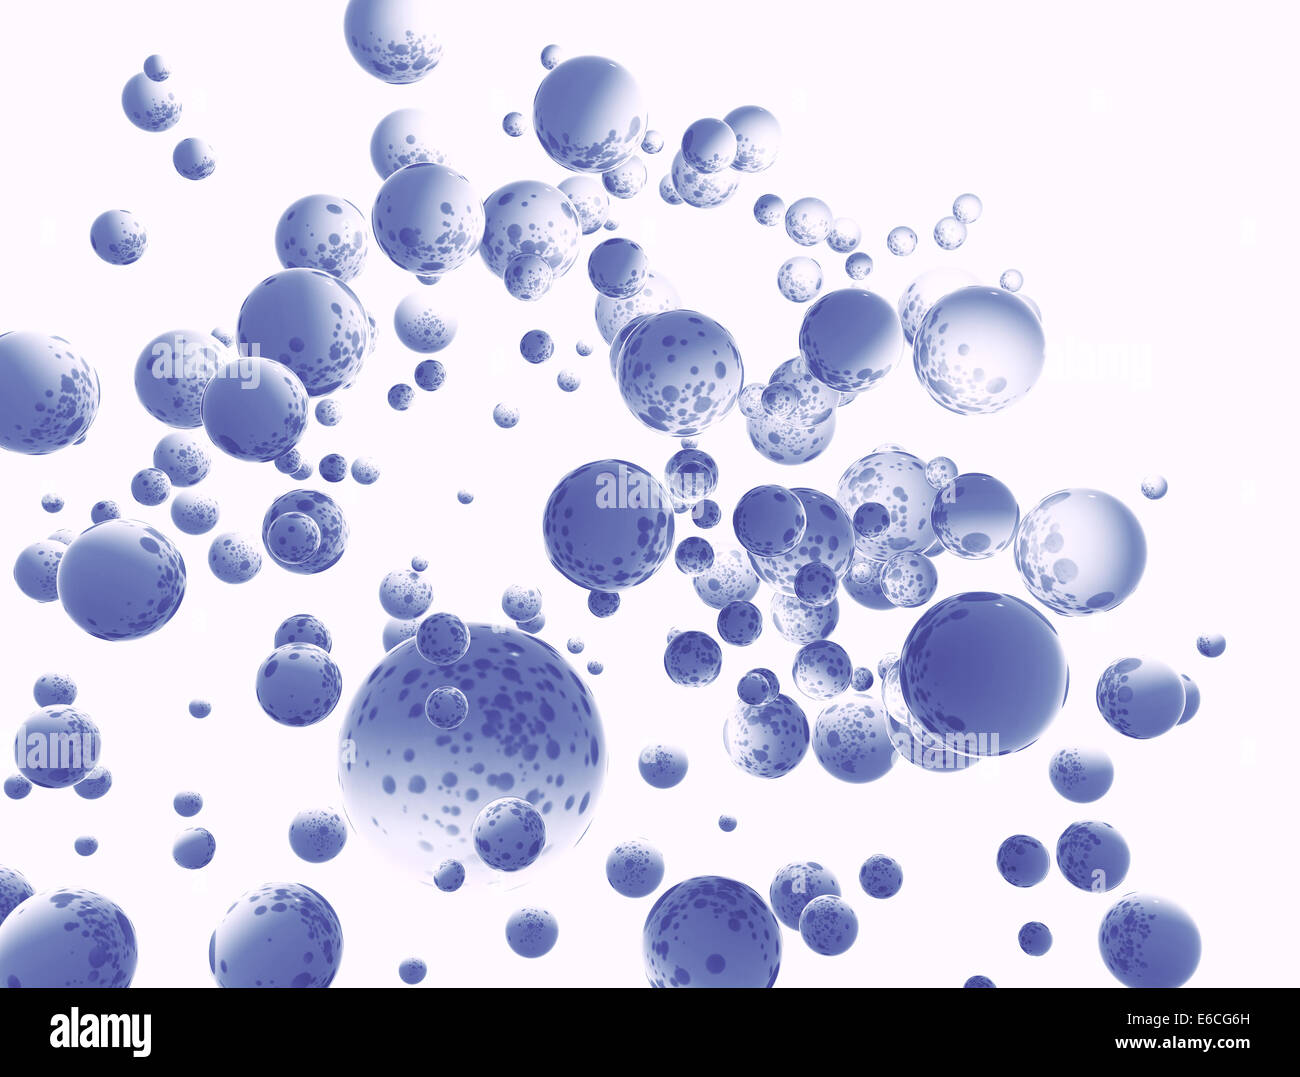 Blue spheres abstract glass orbs background Stock Photo